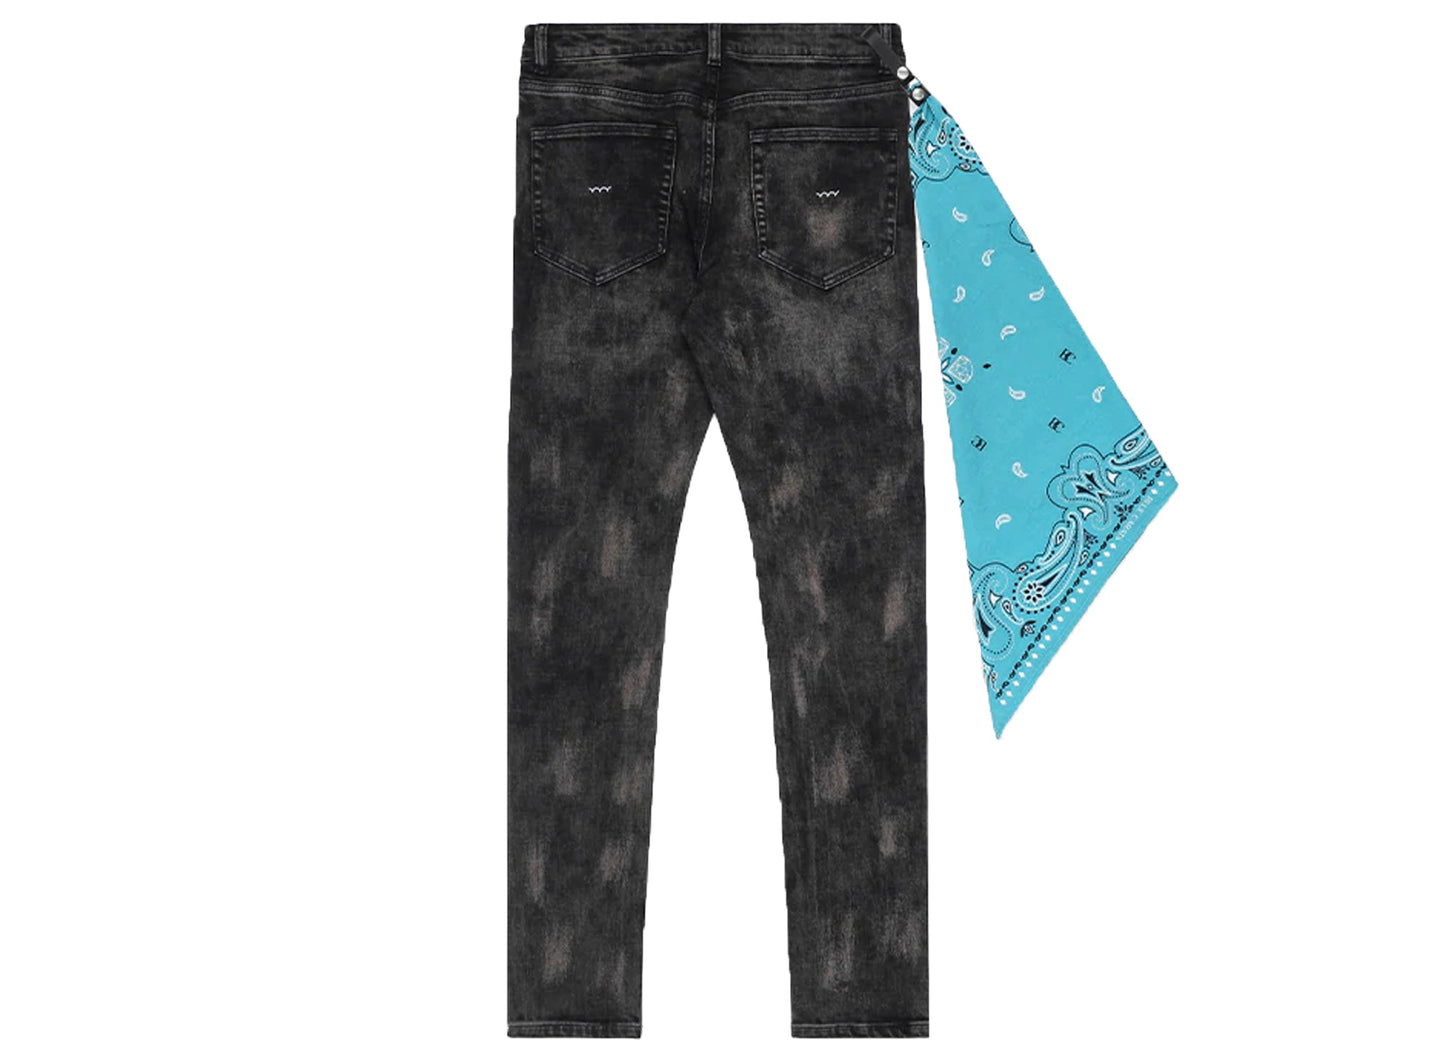 BLUECARATS The McQueen 5 Pocket Slim Fit Jeans